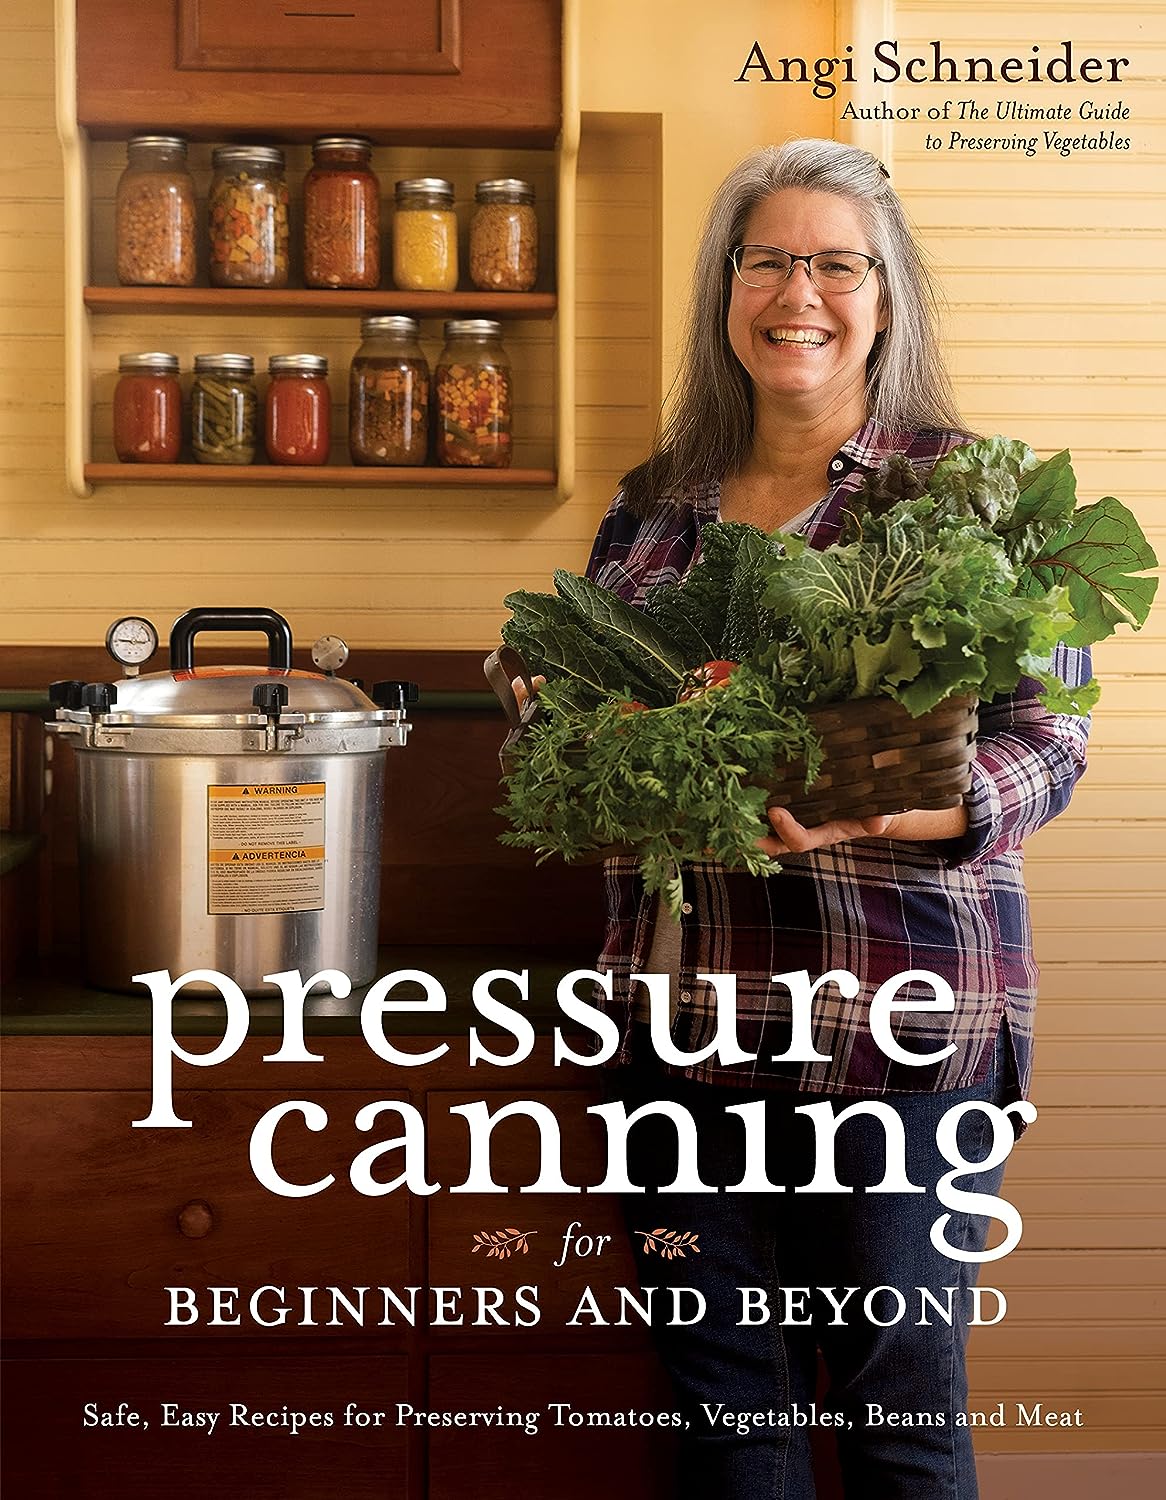 Pressure Canning for Beginners and Beyond: Safe, Easy Recipes for Preserving Tomatoes, Vegetables, Beans and Meat - by Angie Schneider